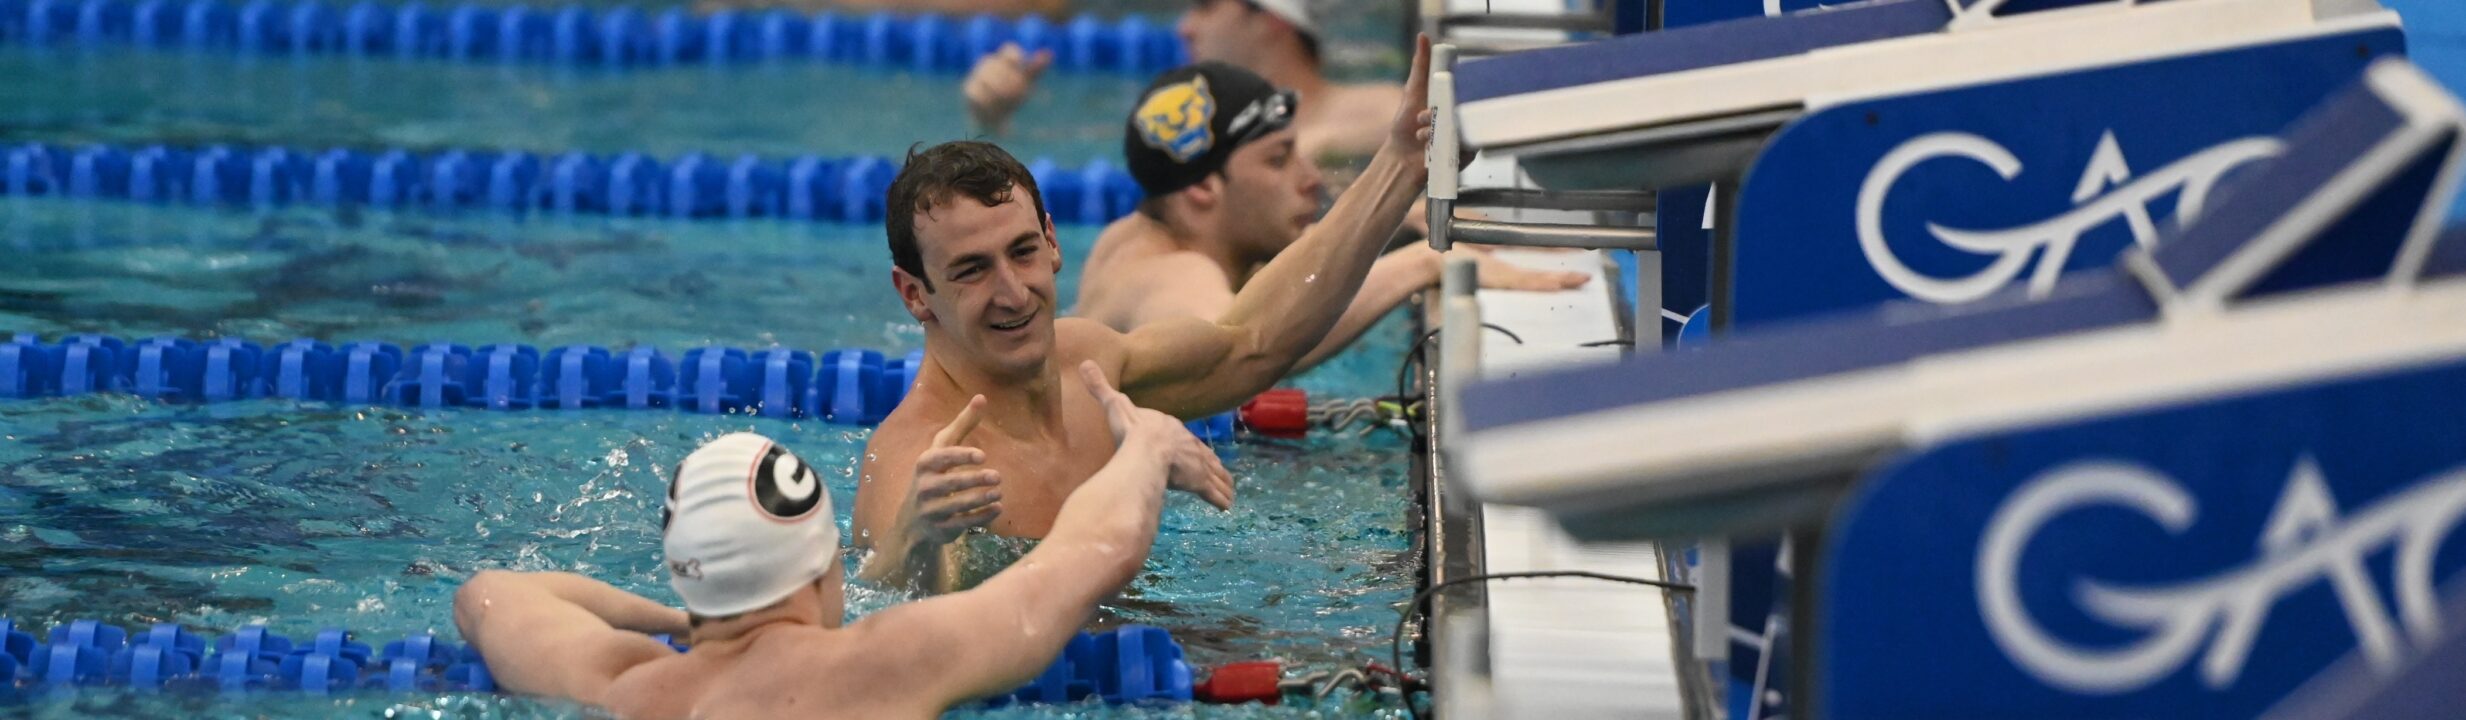 2021 SwimSwam Men’s NCAA Championships Pick ‘Em Contest – Day 1 Results